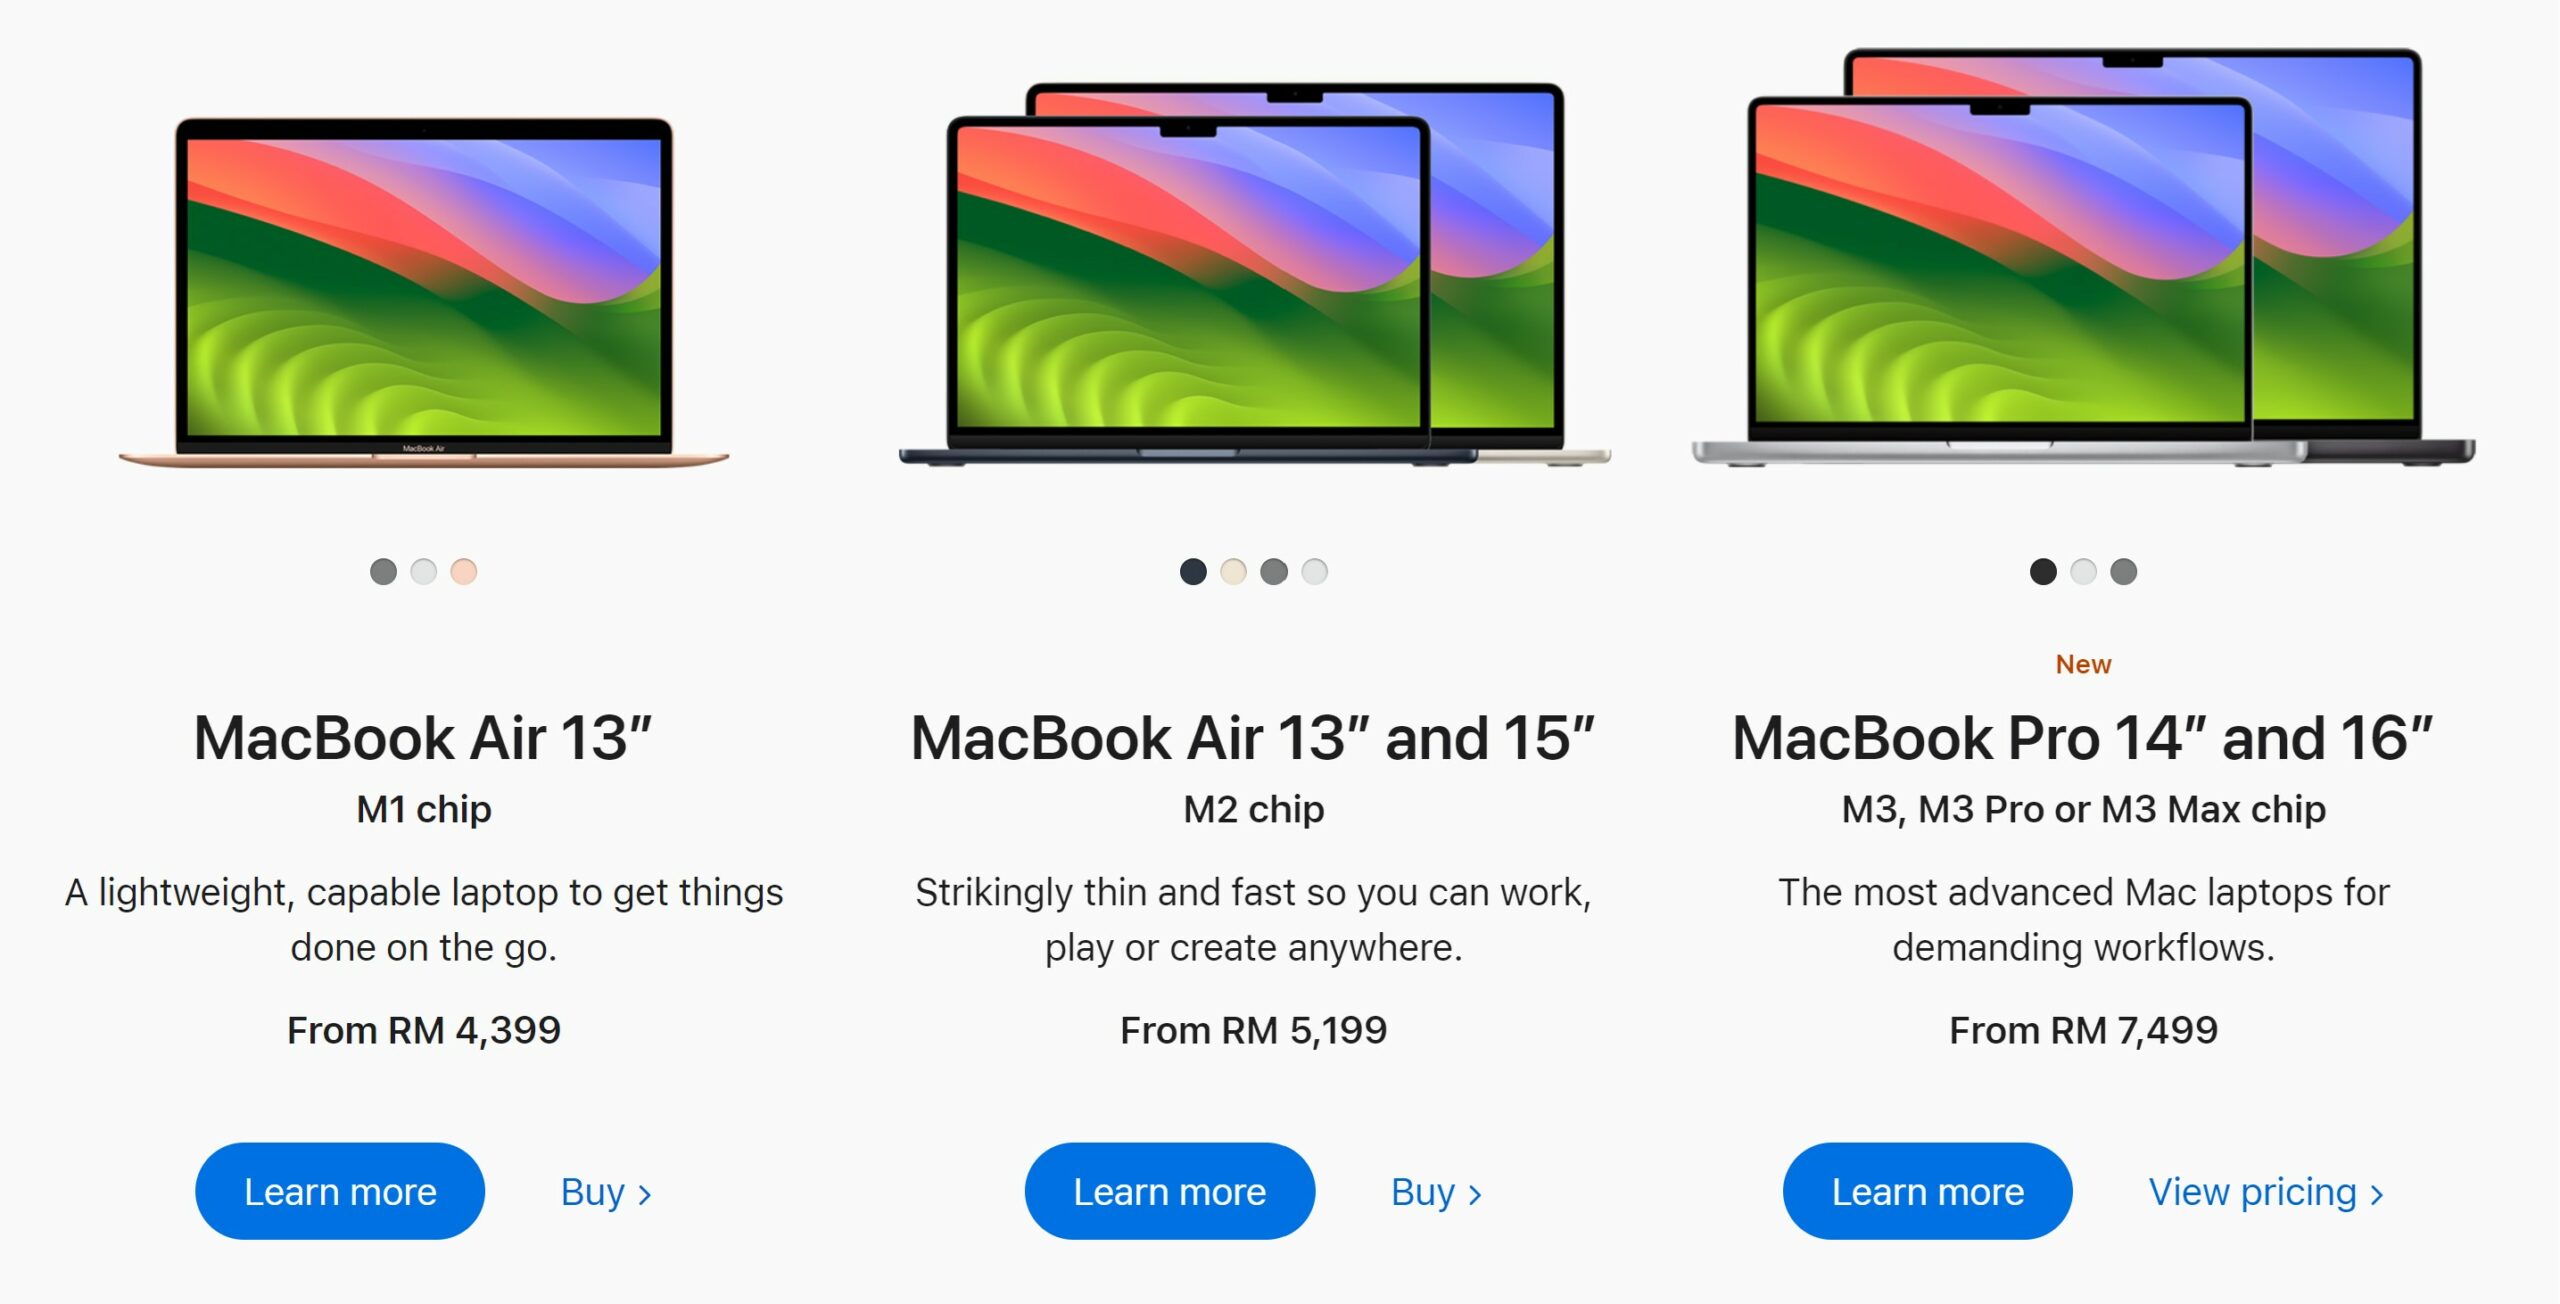 Apple updates its 14-inch and 16-inch MacBook Pros with new M3 chips